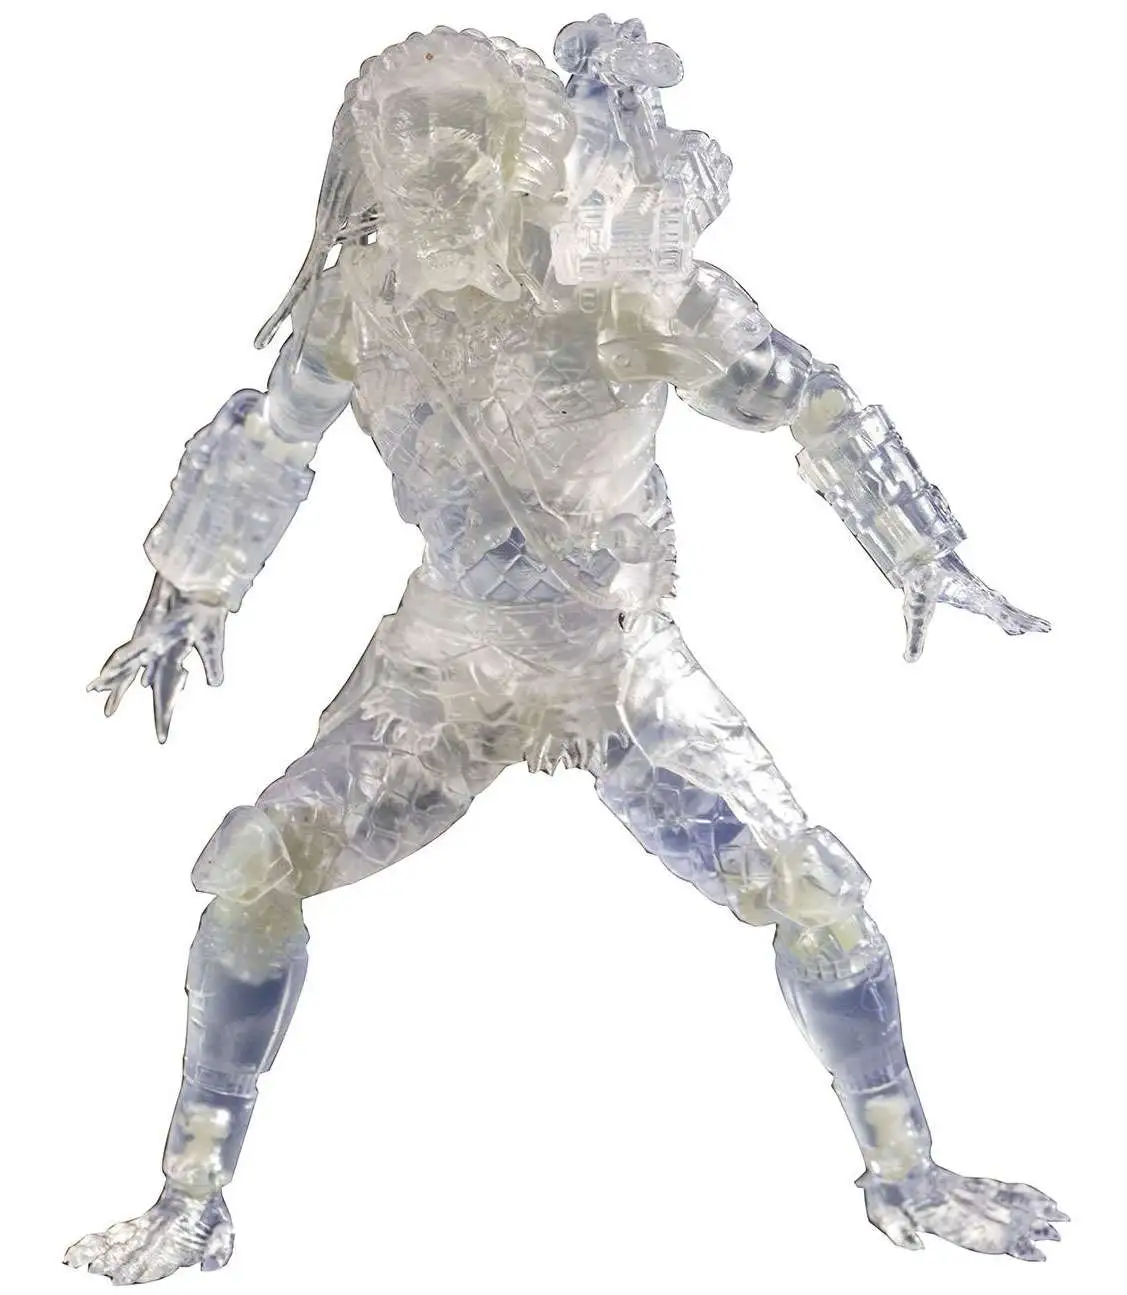 Jungle Predator Exclusive Action Figure [Cloaked Version]